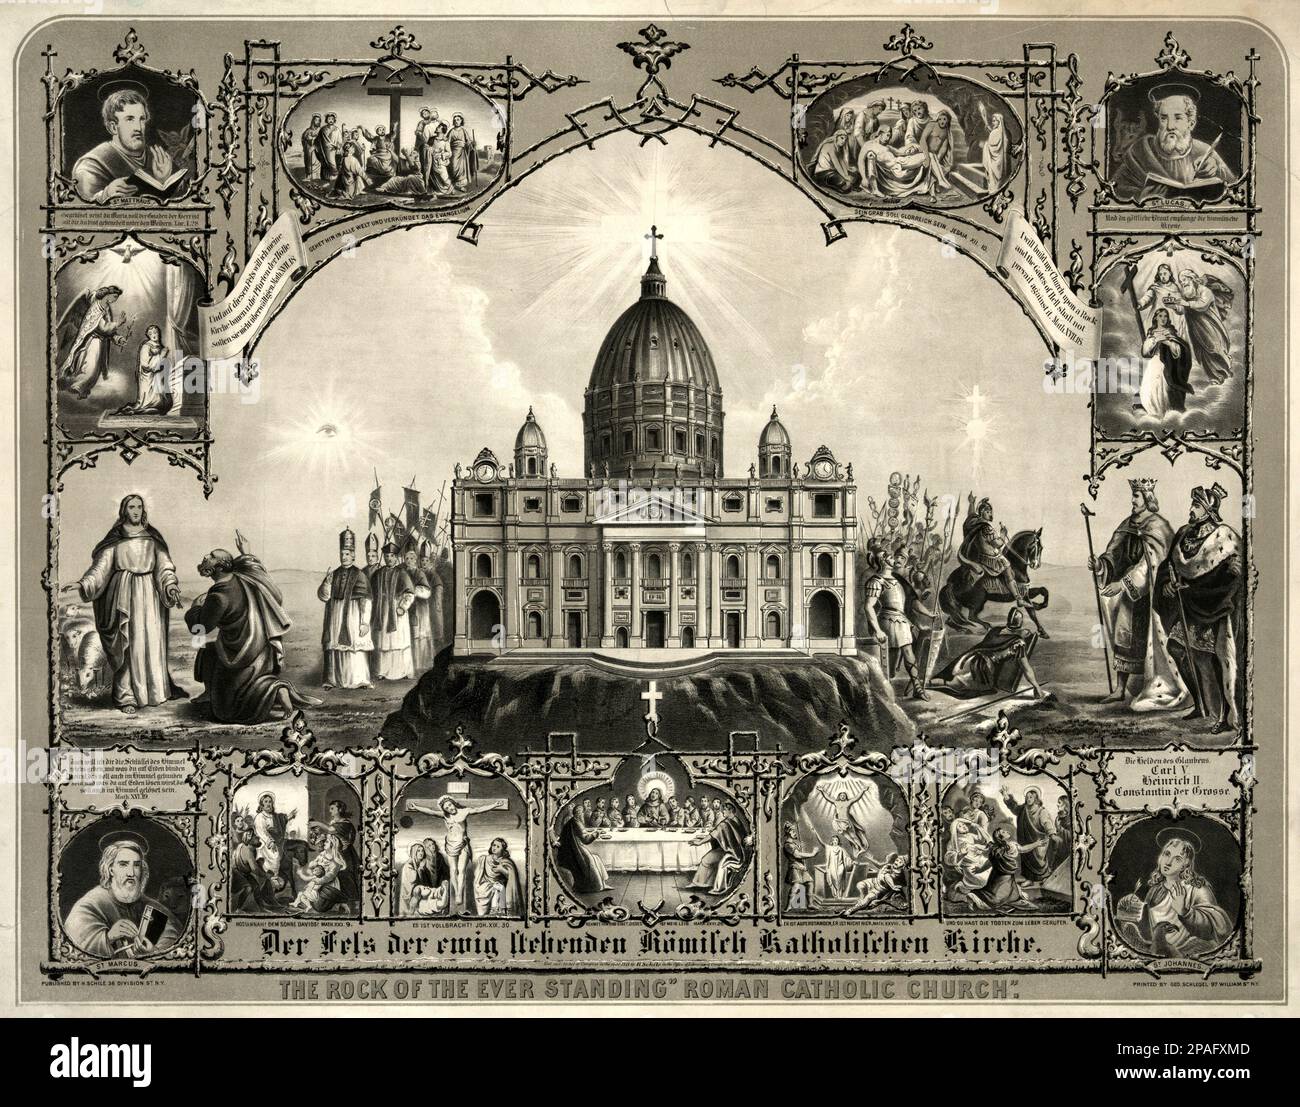 1871 , USA  : The rock of the ever standing Roman Catholic Church . American popular  print with the SAINT PETER chatthedral in Rome with all the defensor of Roman Catholic church , the life of Jesus Christ and the four Evangelists ( Lucas , Matthew , Marcus and Johannes ), Constaintin the Great , Carl V , Heinrich II , Saint Peter and the Pope Pious IX   - IMMAGINE SACRA - POPOLARE - RELIGIONE - VERGINE MARIA  - RELIGIONE CATTOLICA - CATHOLIC RELIGION - portrait - ritratto - illustrazione - incisione  - Oleografia popolare - Apostoli : San Luca , San Marco , San Matteo e San Giovanni - Pio IX Stock Photo